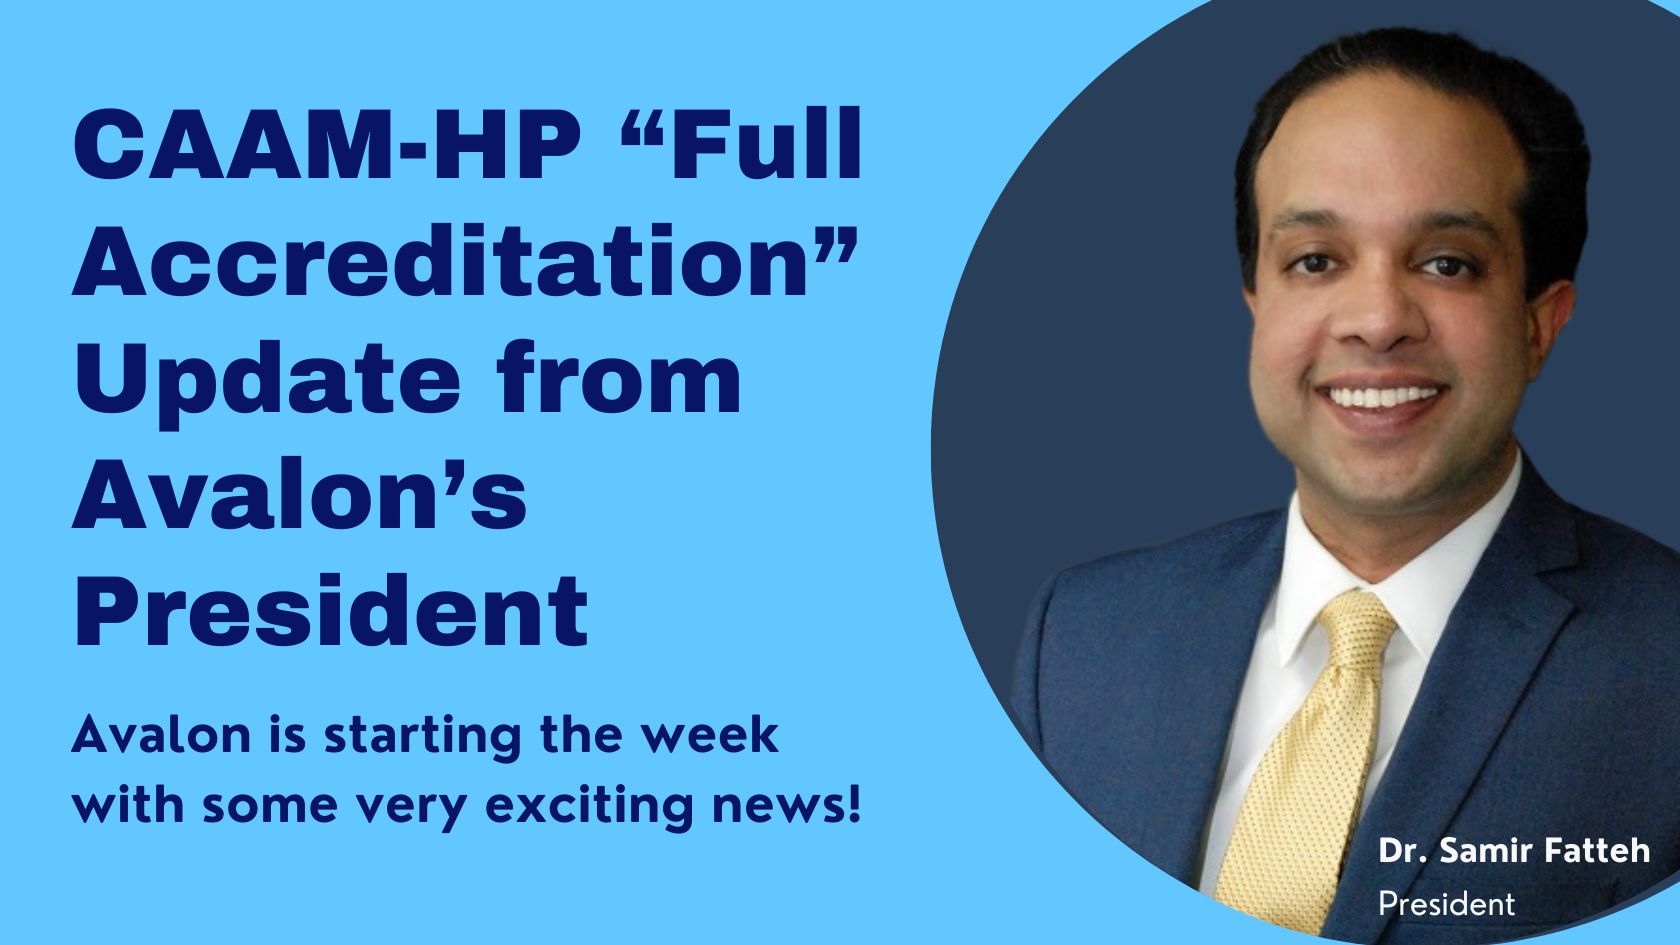 CAAM-HP “Full Accreditation” Update from Avalon’s President